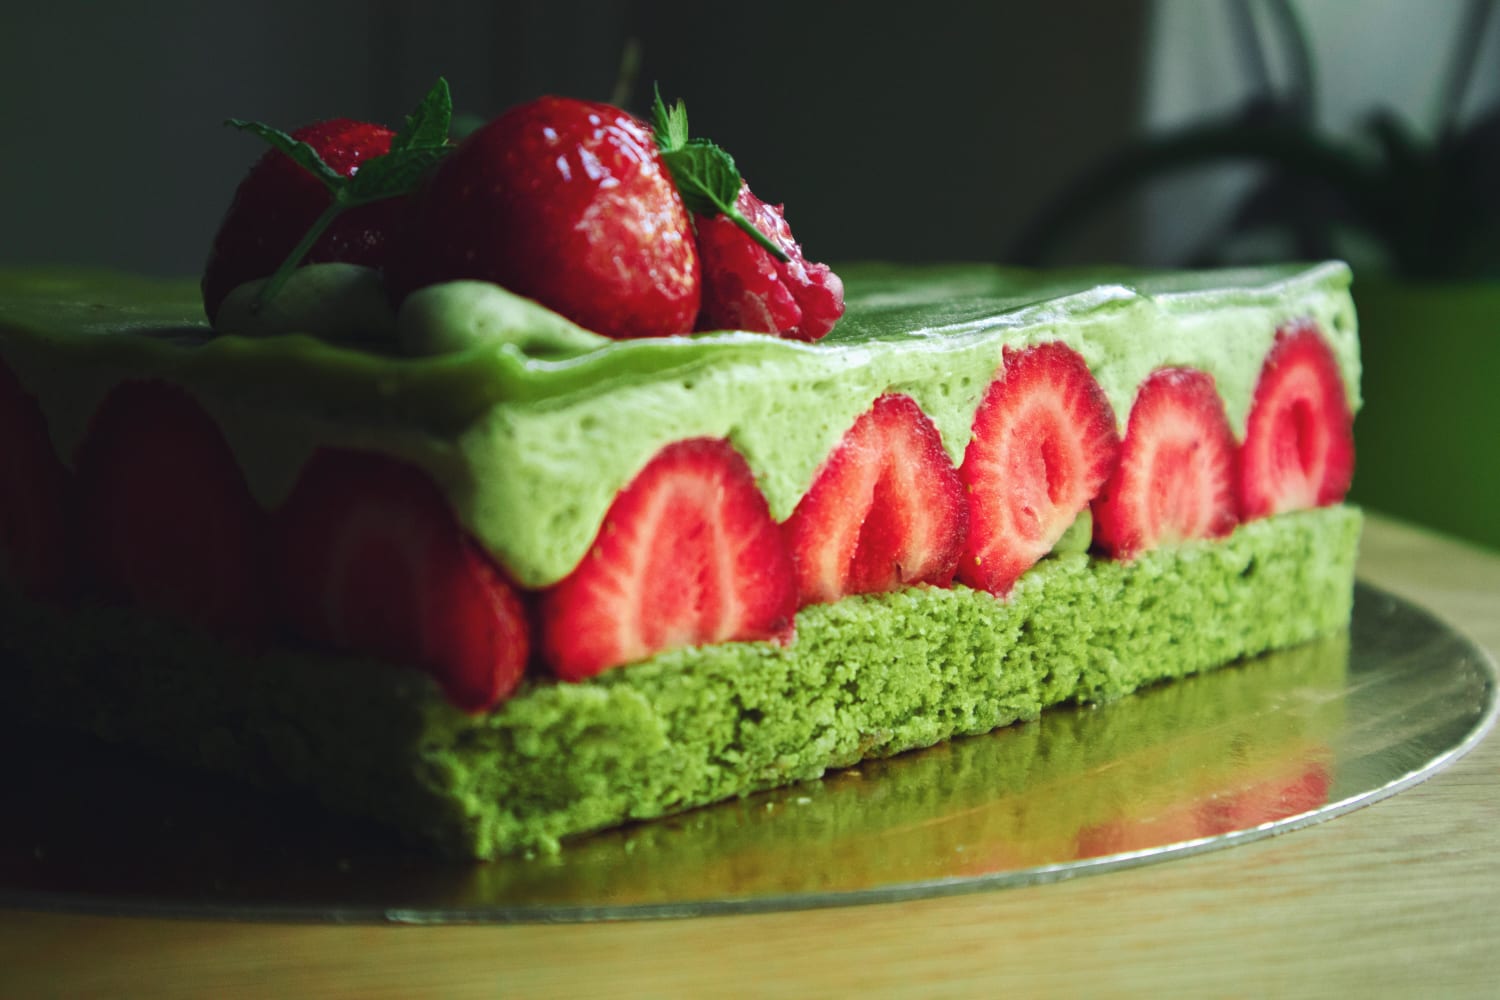 My cousin made me a delicious matcha cake